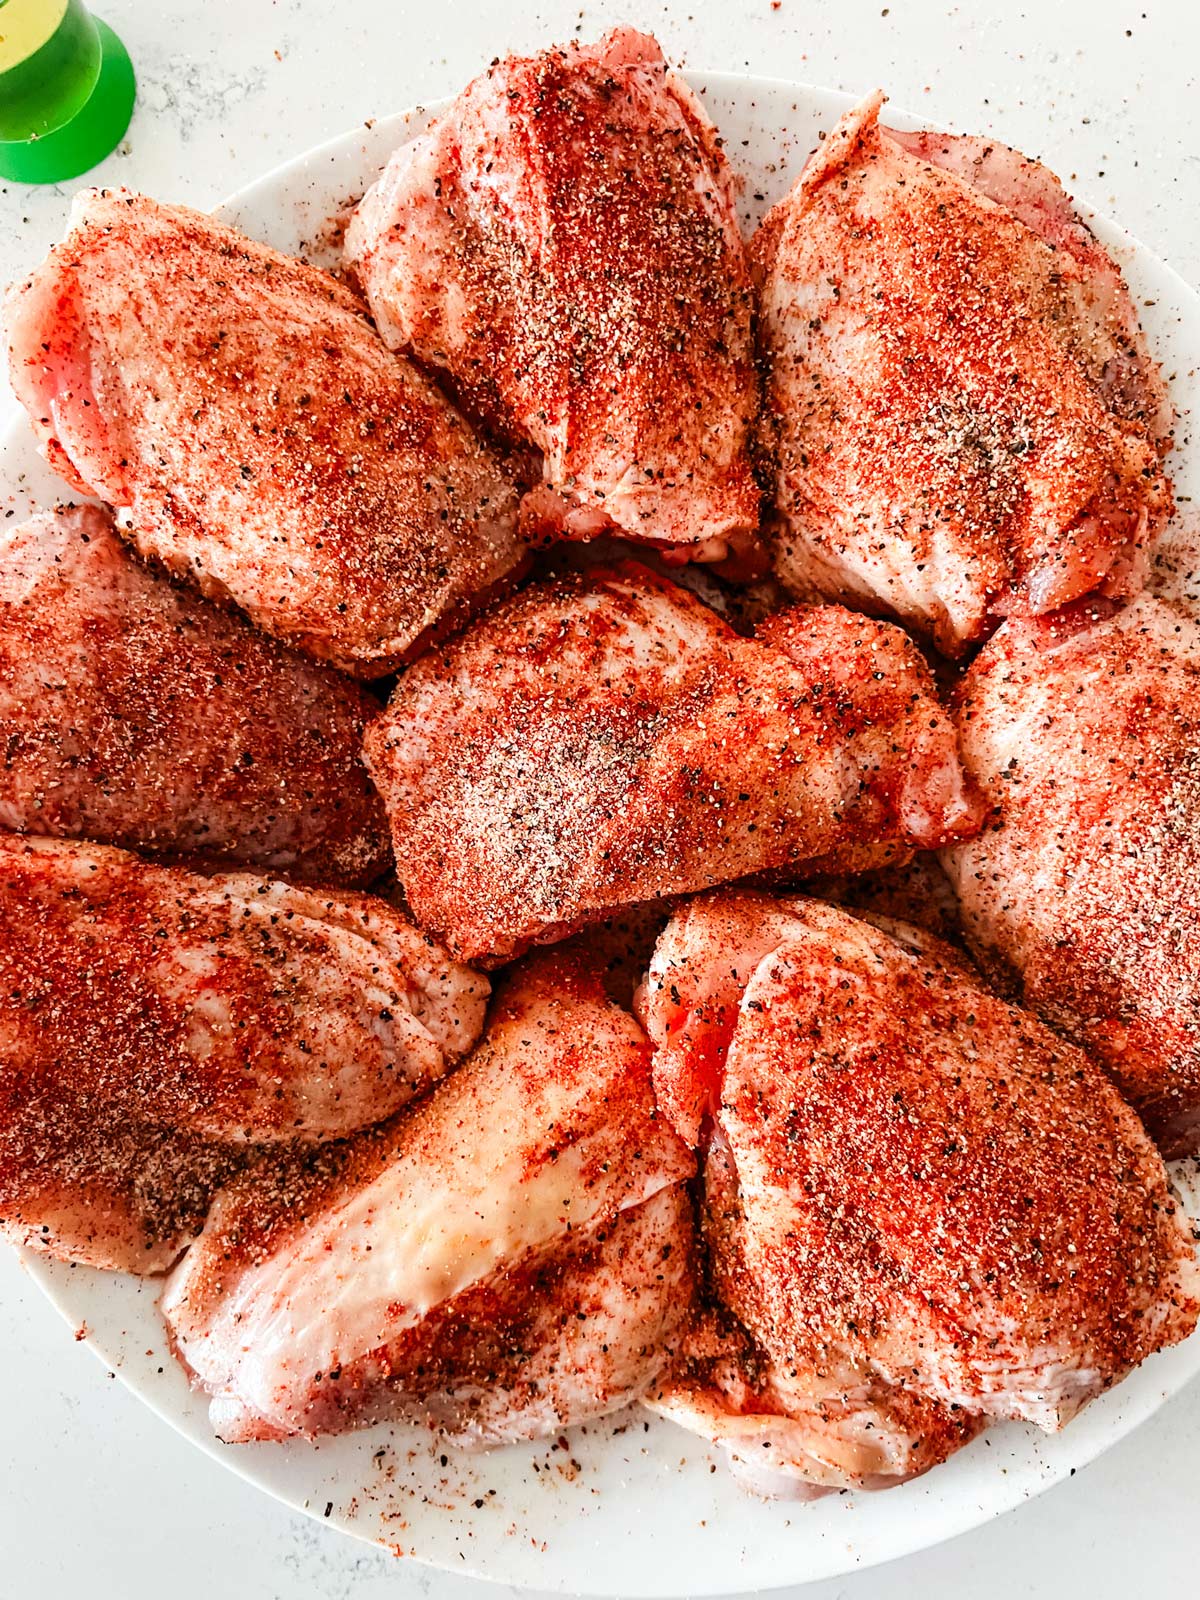 Close up photo of seasoned chicken thighs on a white plate.